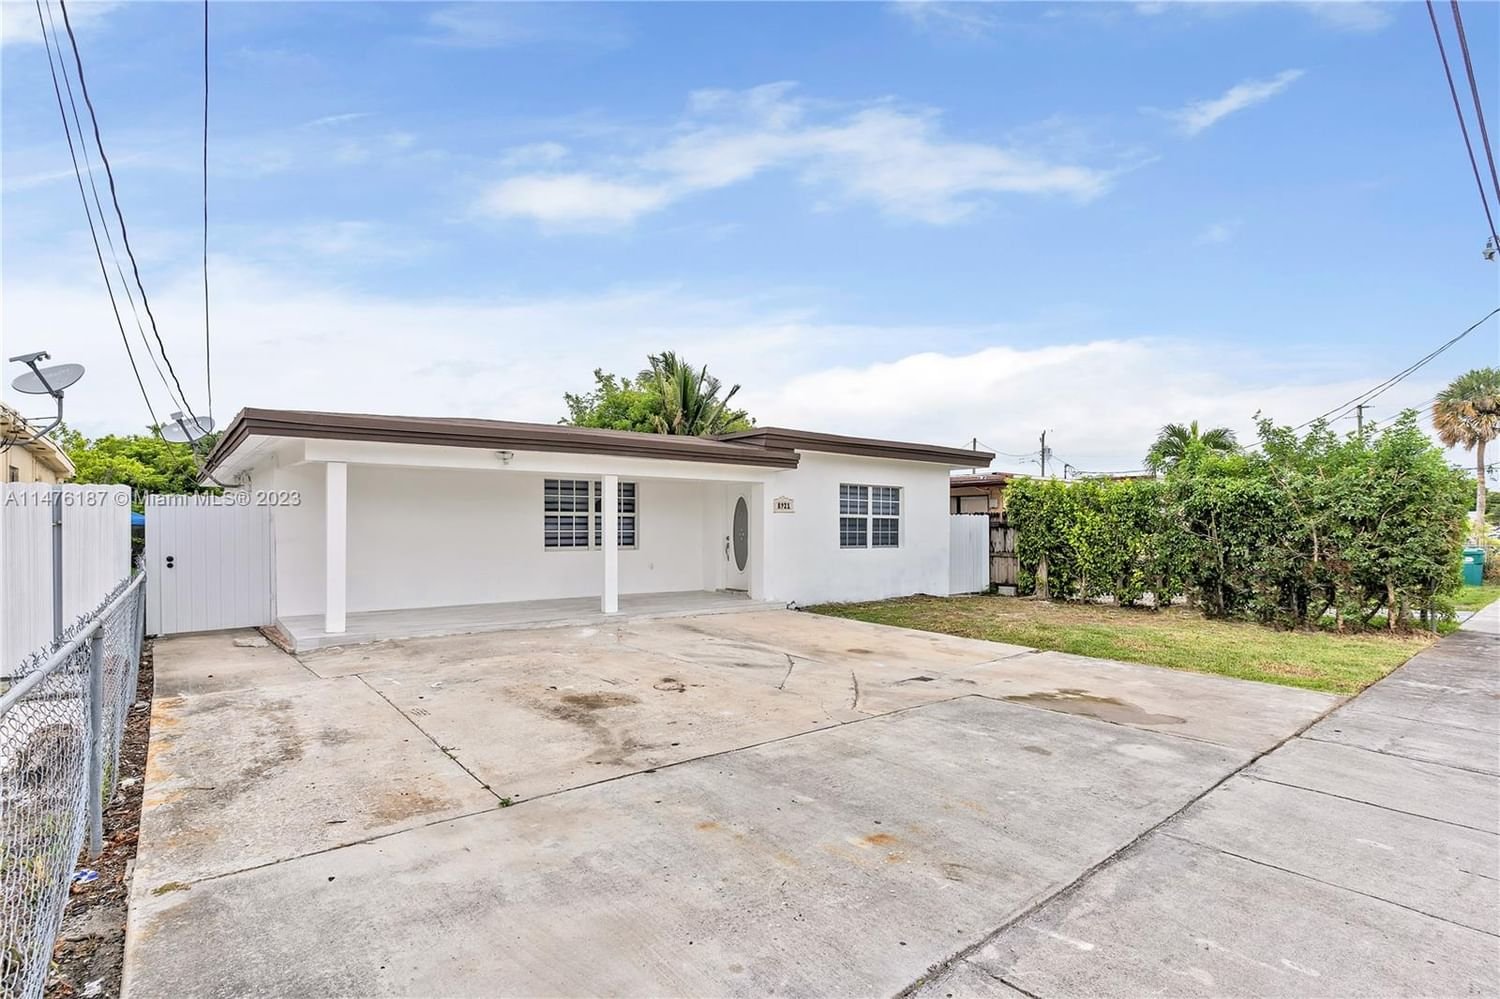 Real estate property located at 8921 34th St, Miami-Dade County, OLYMPIC HEIGHTS, Miami, FL